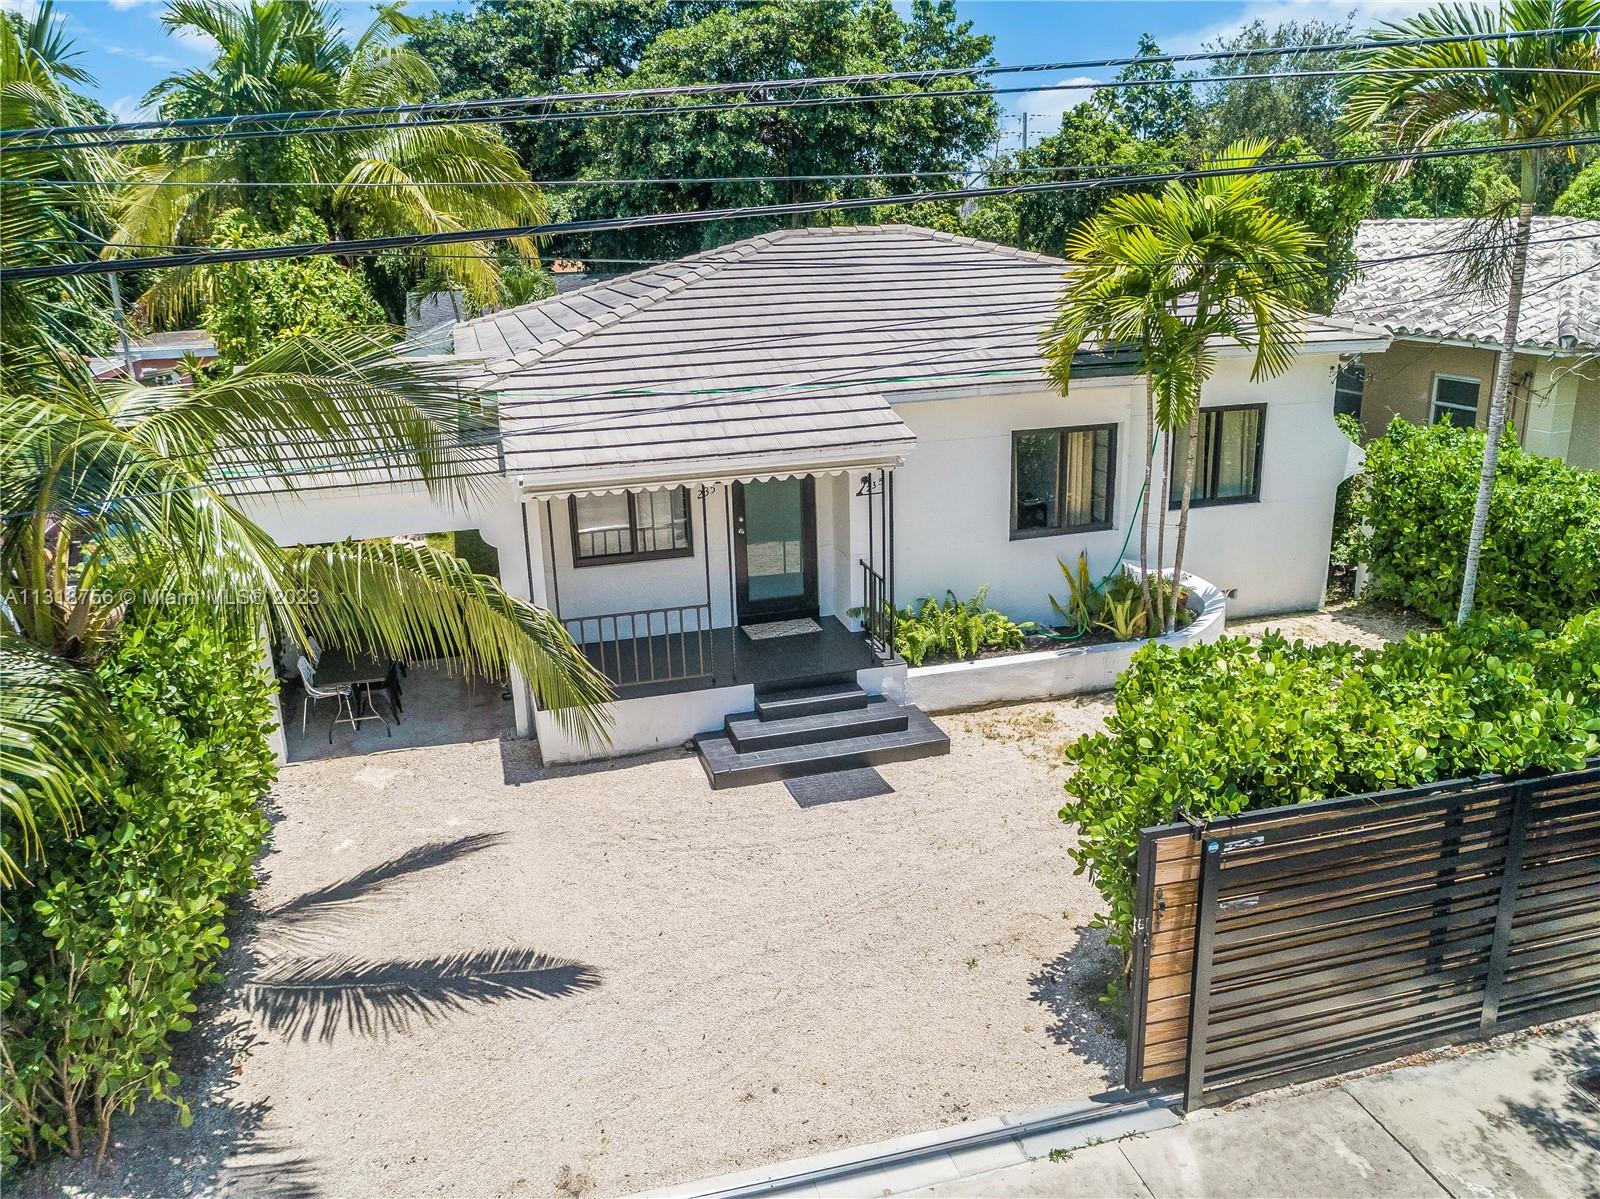 Property for Sale at 235 Nw 50th St St, Miami, Broward County, Florida - Bedrooms: 6 
Bathrooms: 3  - $1,025,000